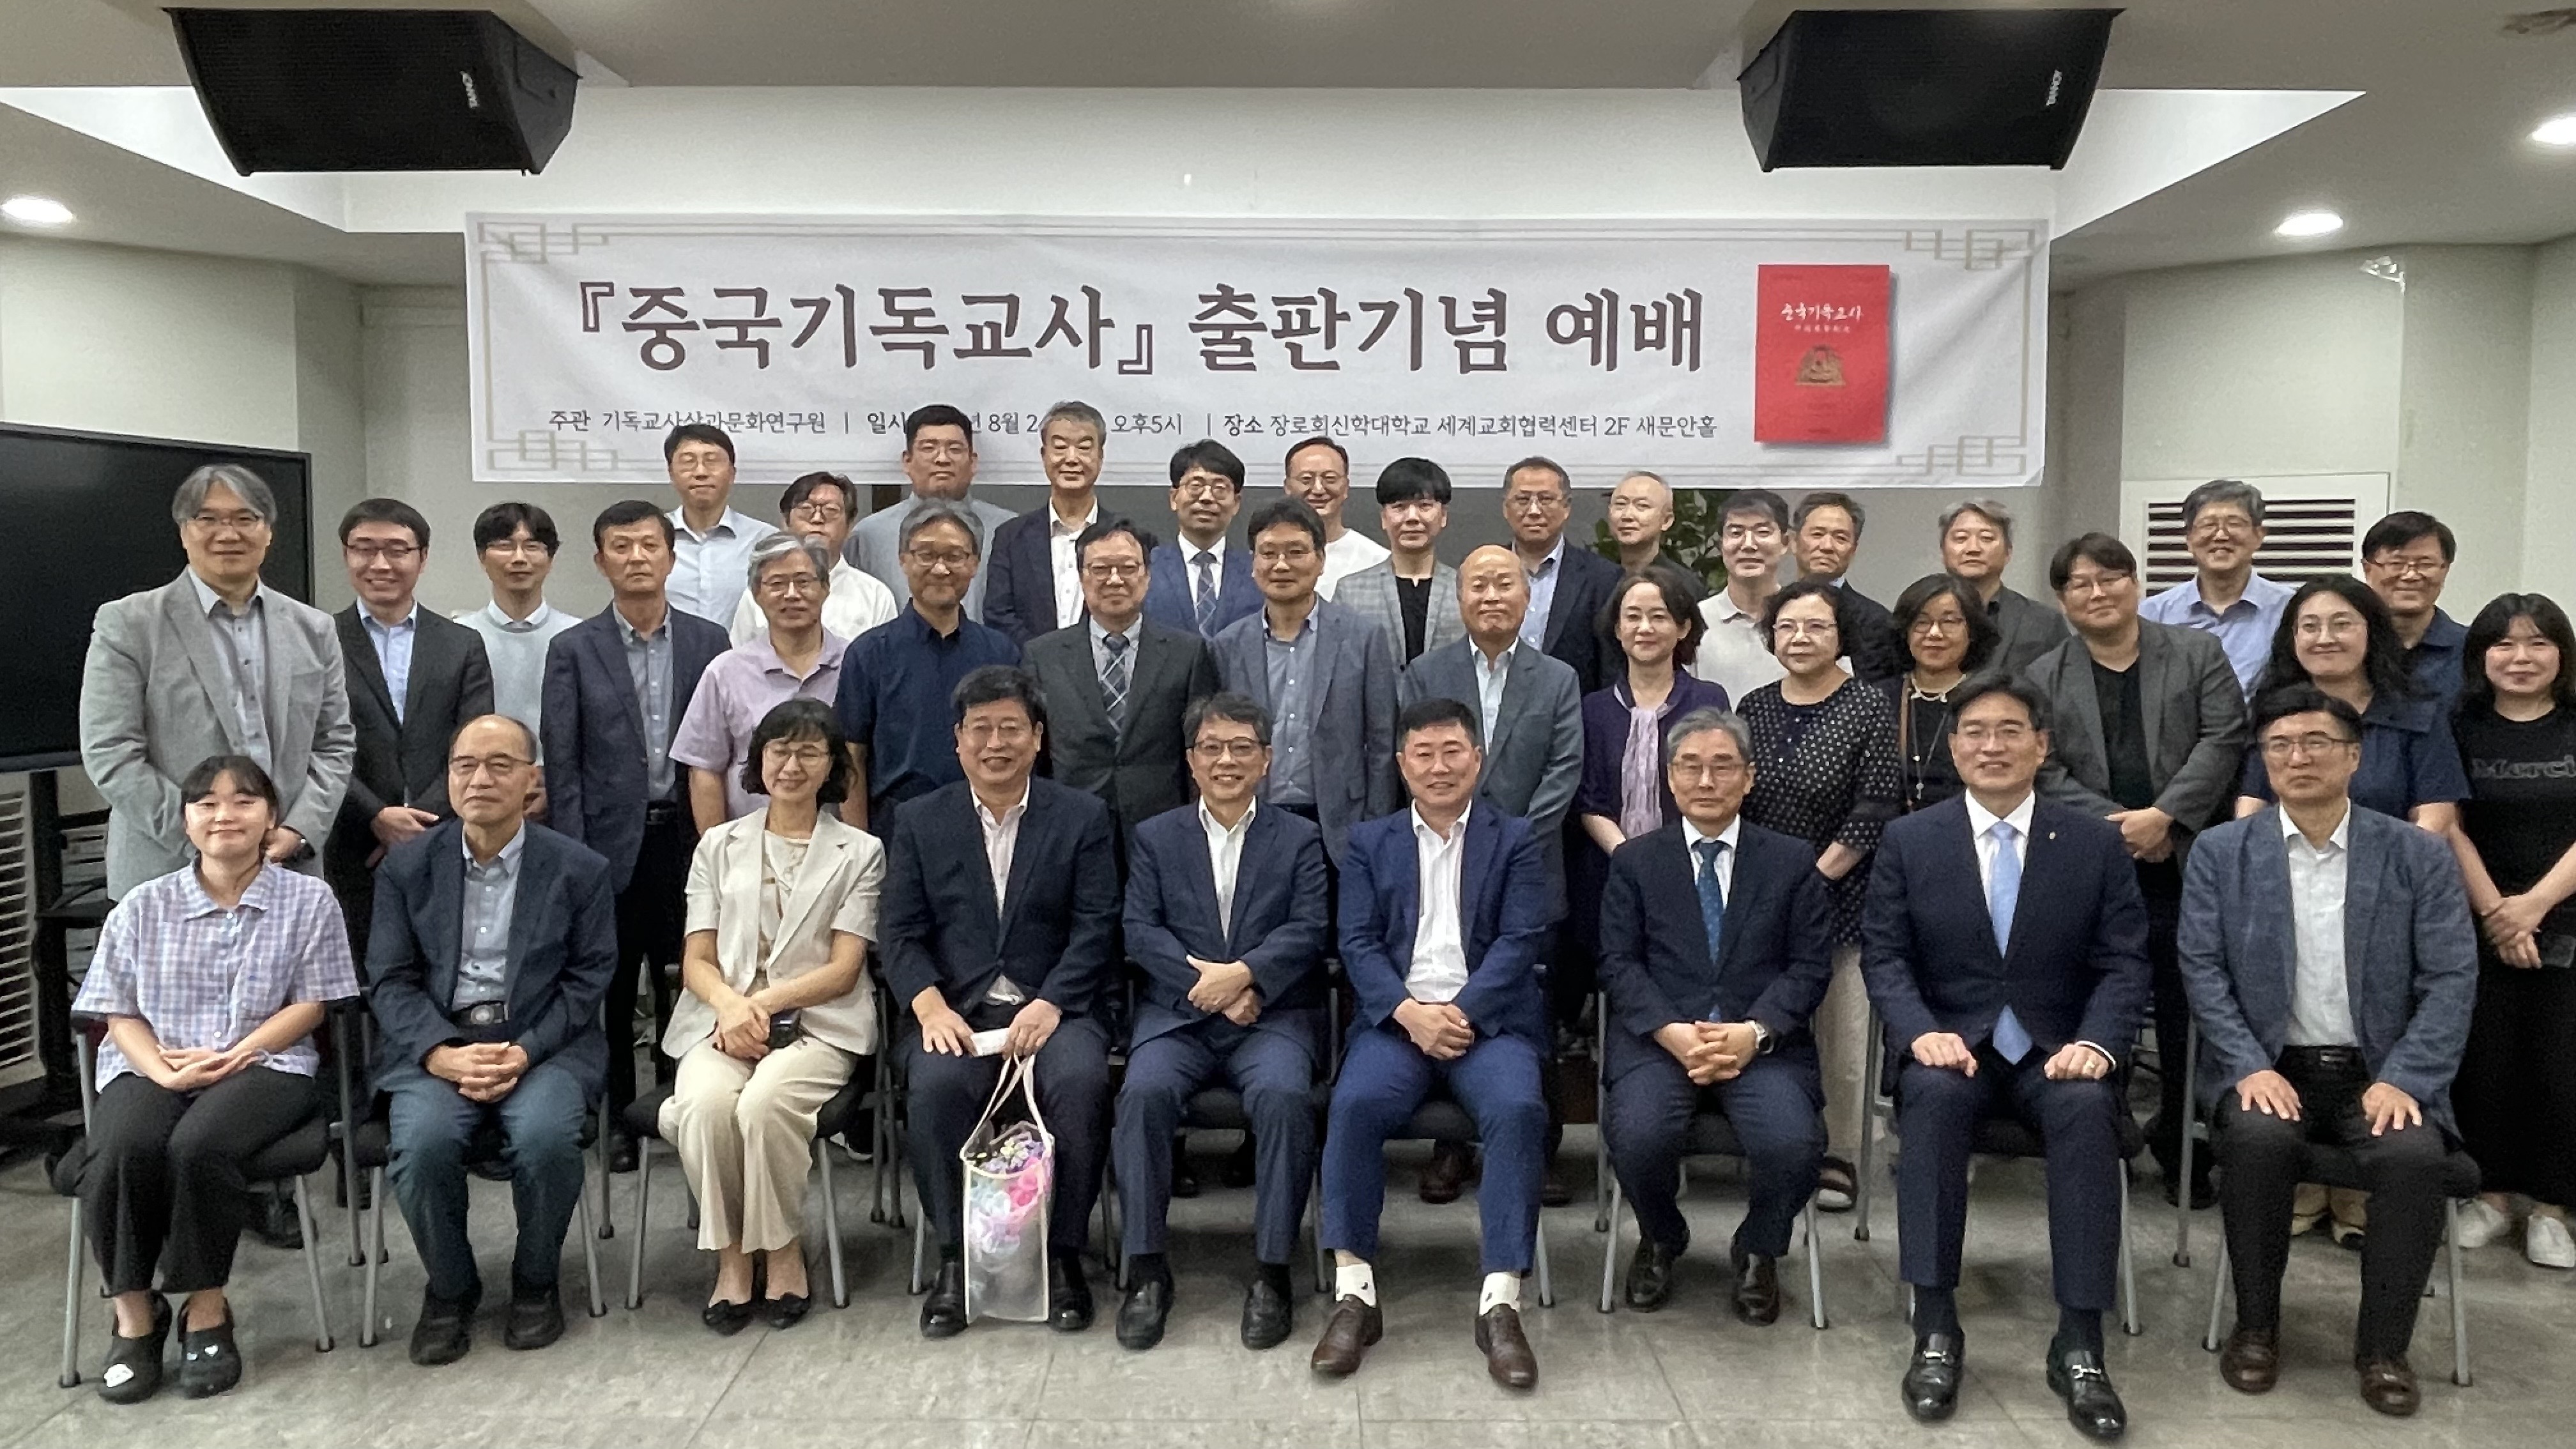 The commemorative service for the publication of the Korean version of The History of Christianity in China was held at the Presbyterian University and Theological Seminary in the Gwangjin district of Seoul, South Korea, on August 24, 2023.